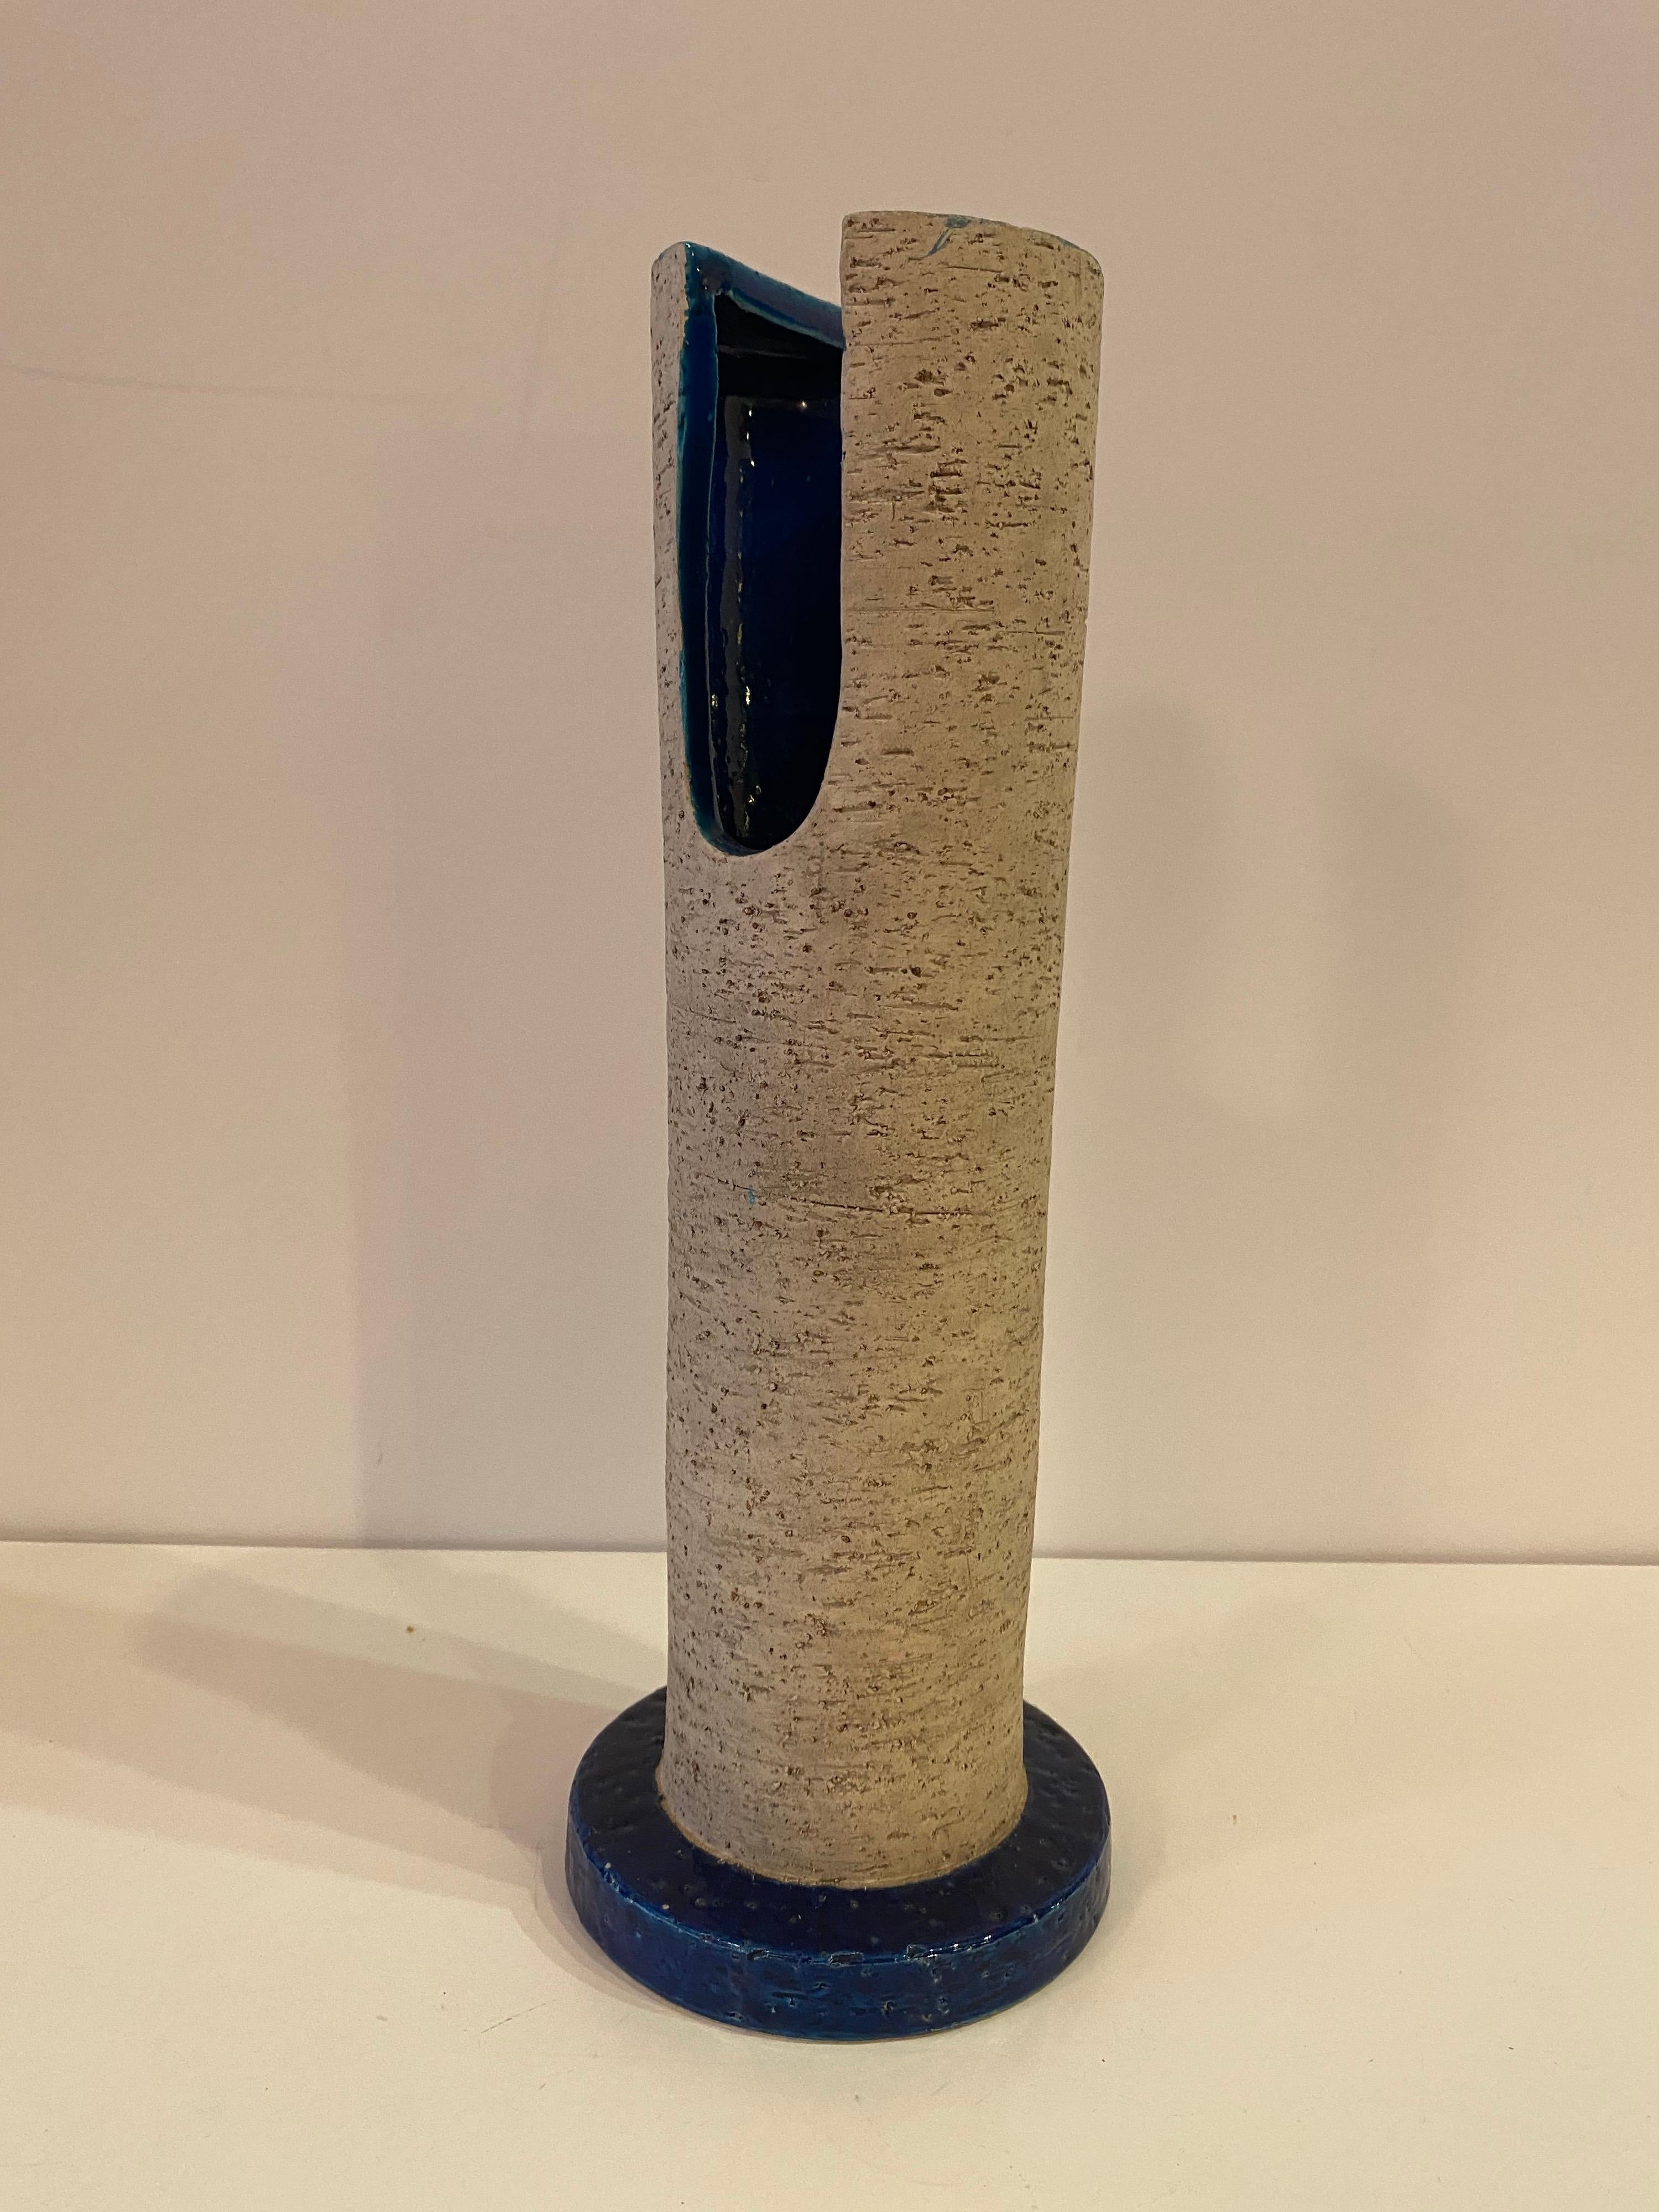 Aldo Londi for Raymor Ceramic 13.5 tall vase. Unusual design with cut out sections toward top of Cylinder. Blue Glaze on inside and bottom rim. Vase retains its original Raymor label.